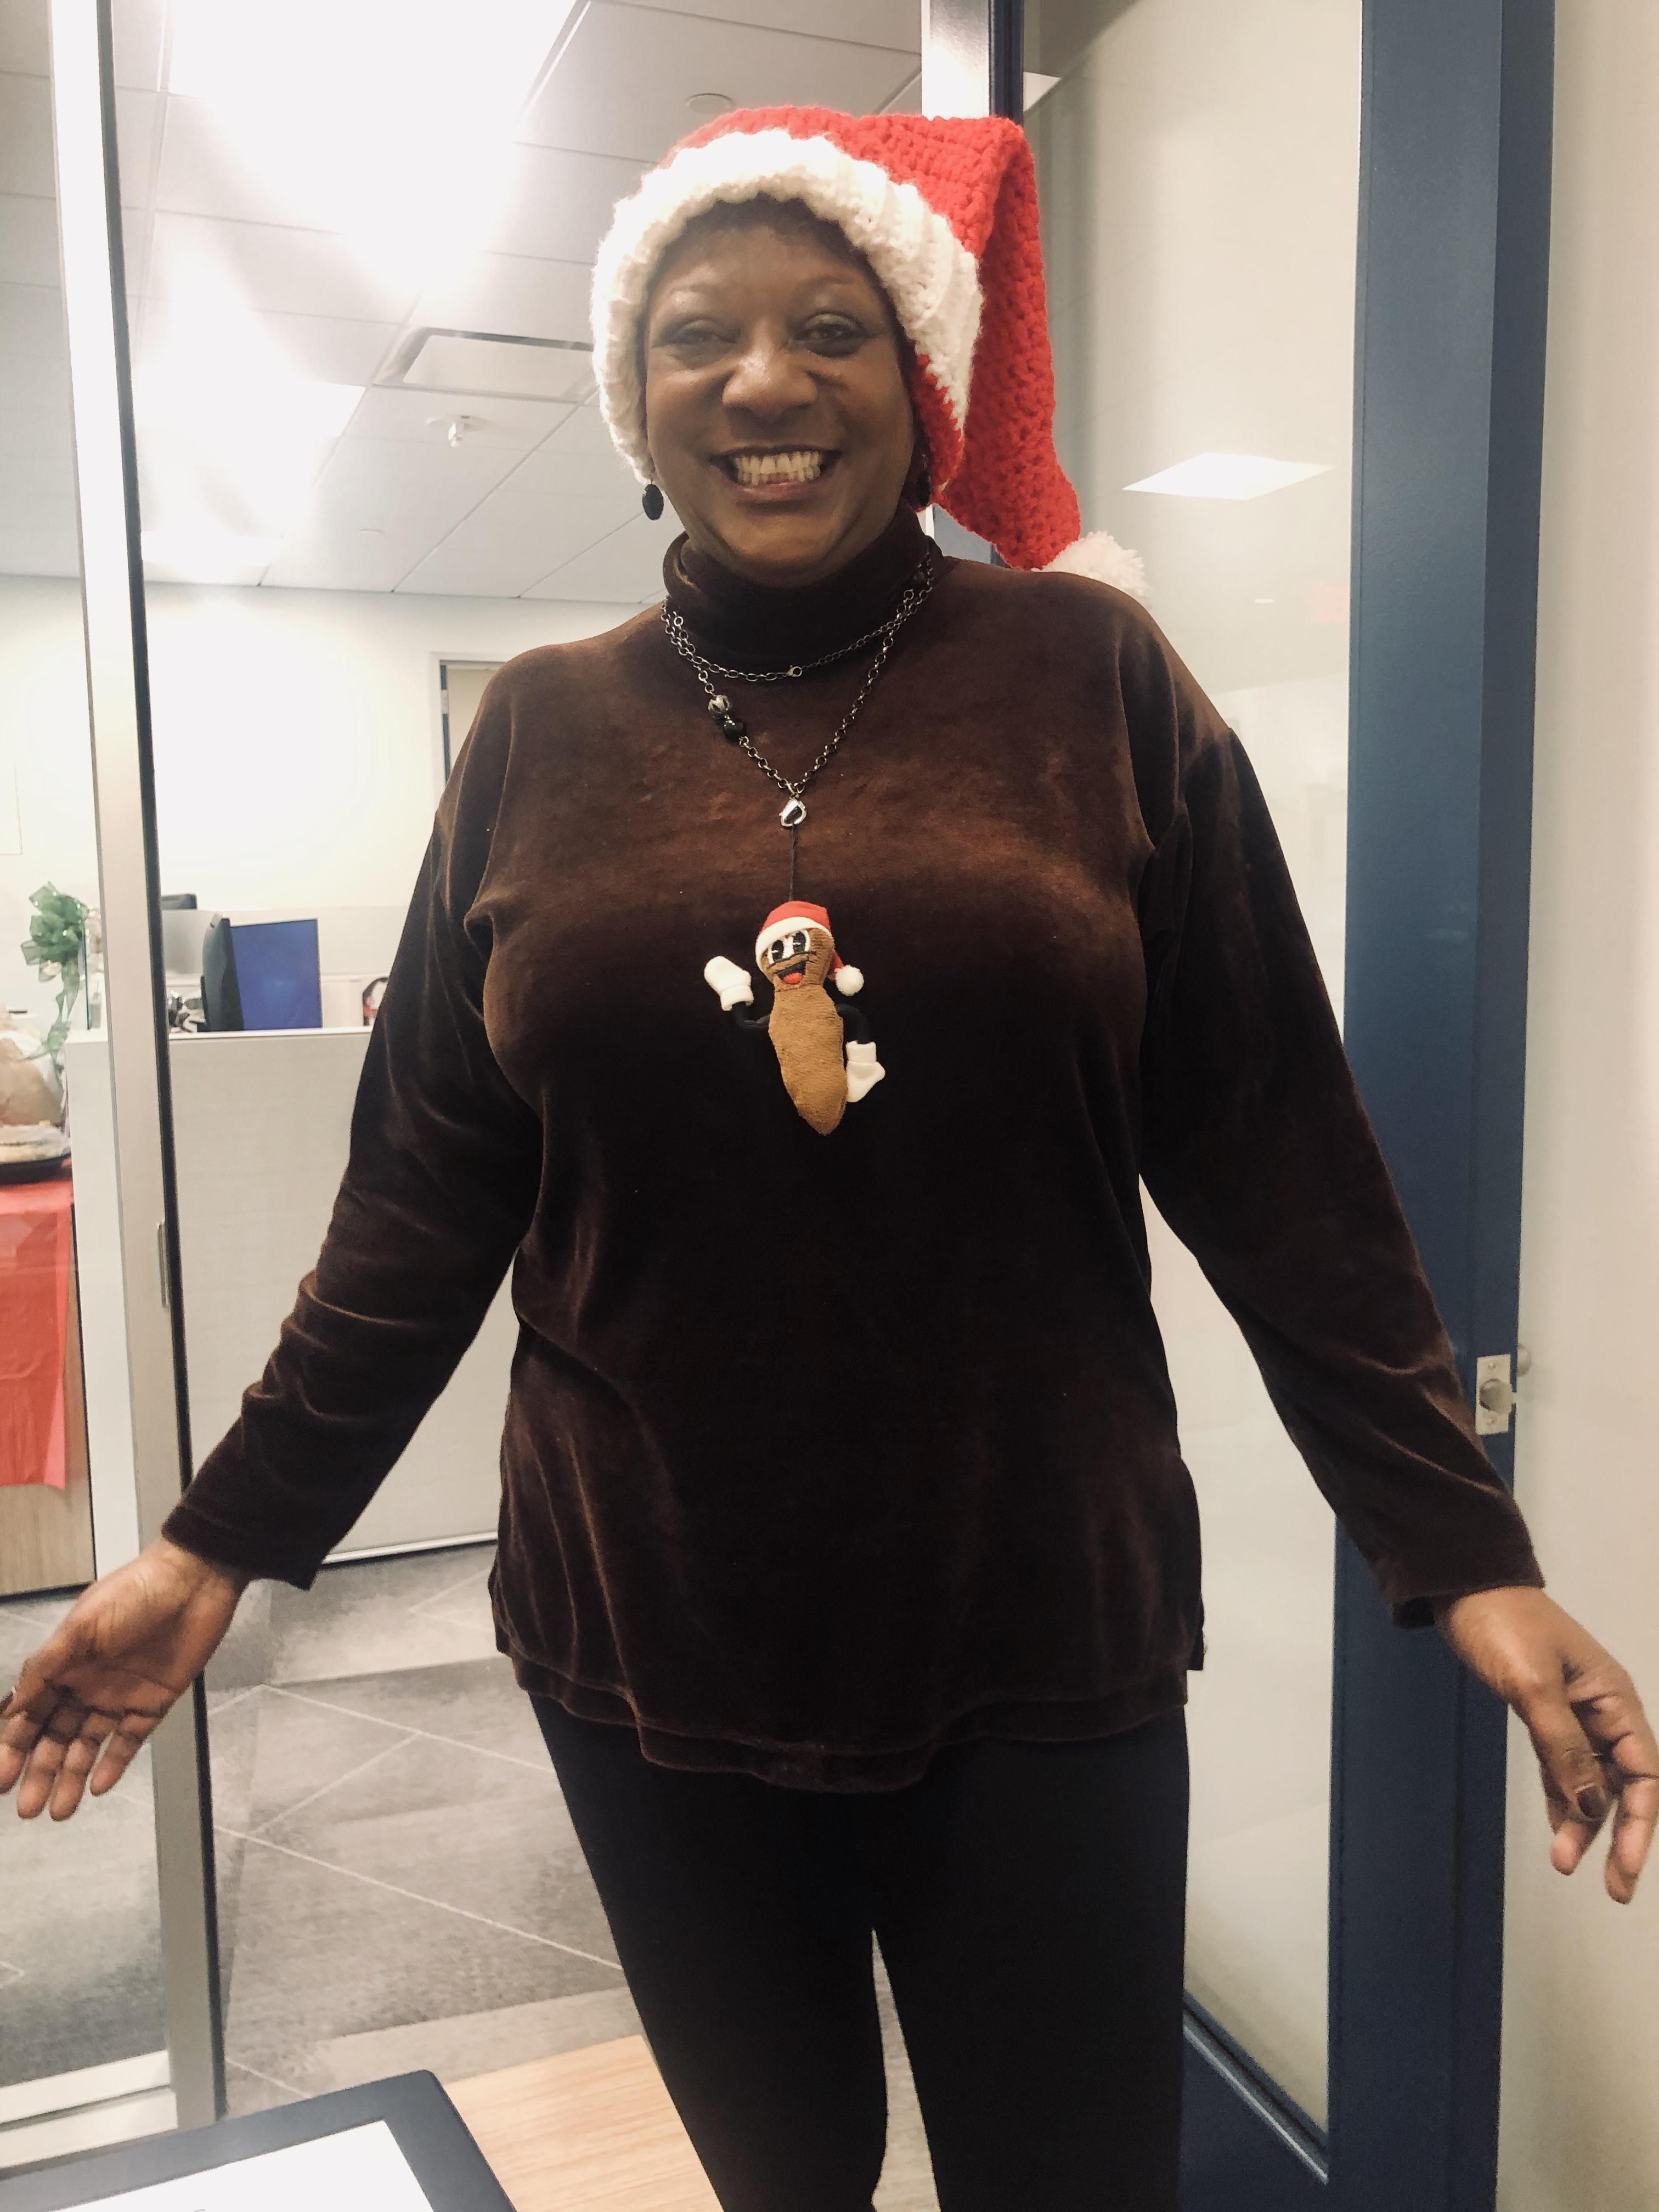 My coworker came to the office holiday food fest dressed like Mr. Hanky.